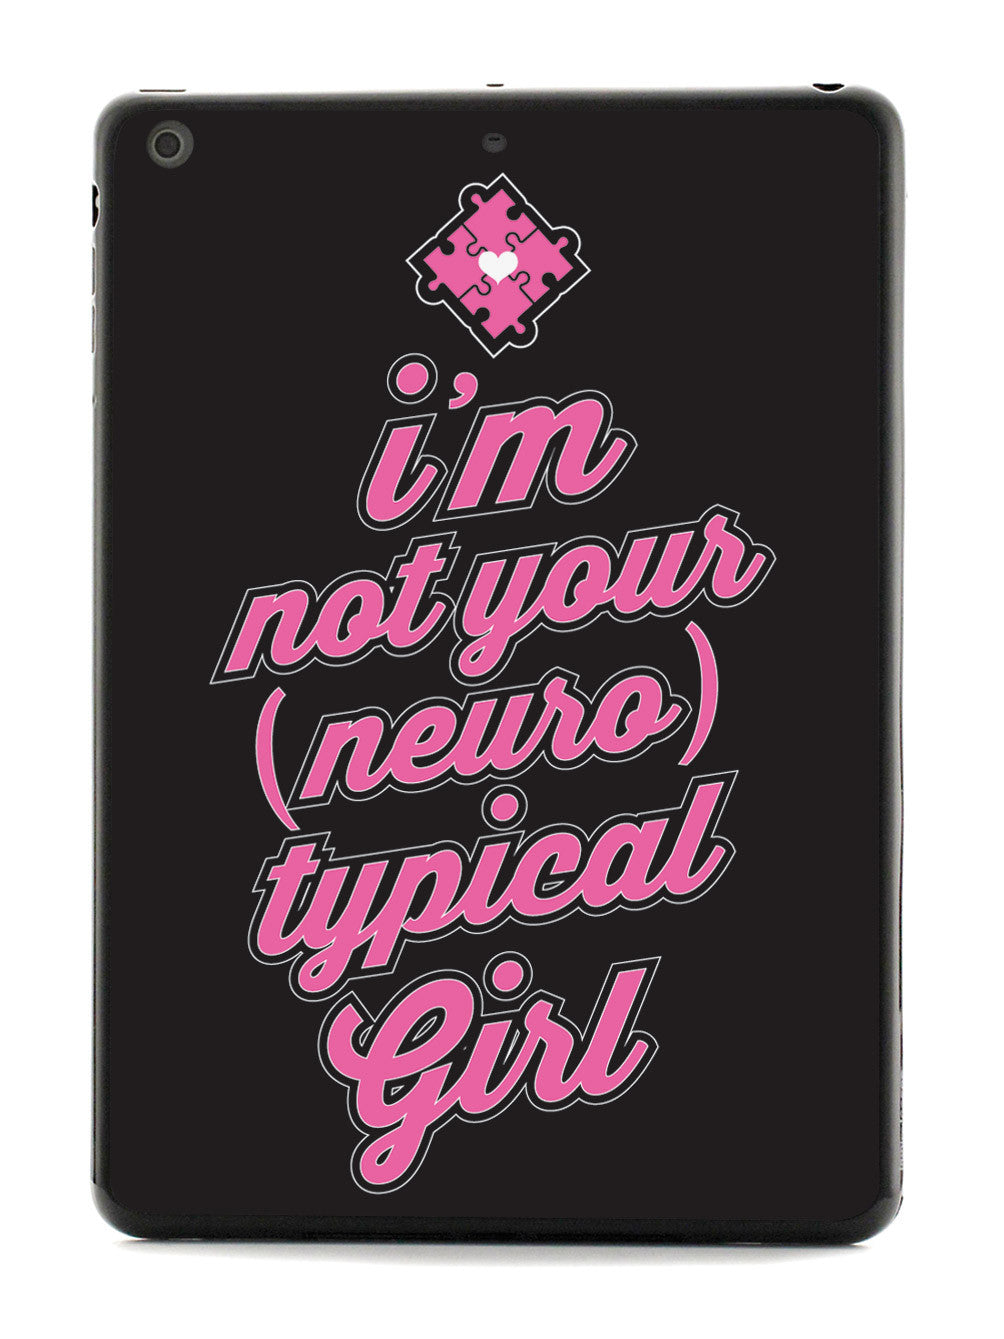 Not Your Neurotypical Girl Case